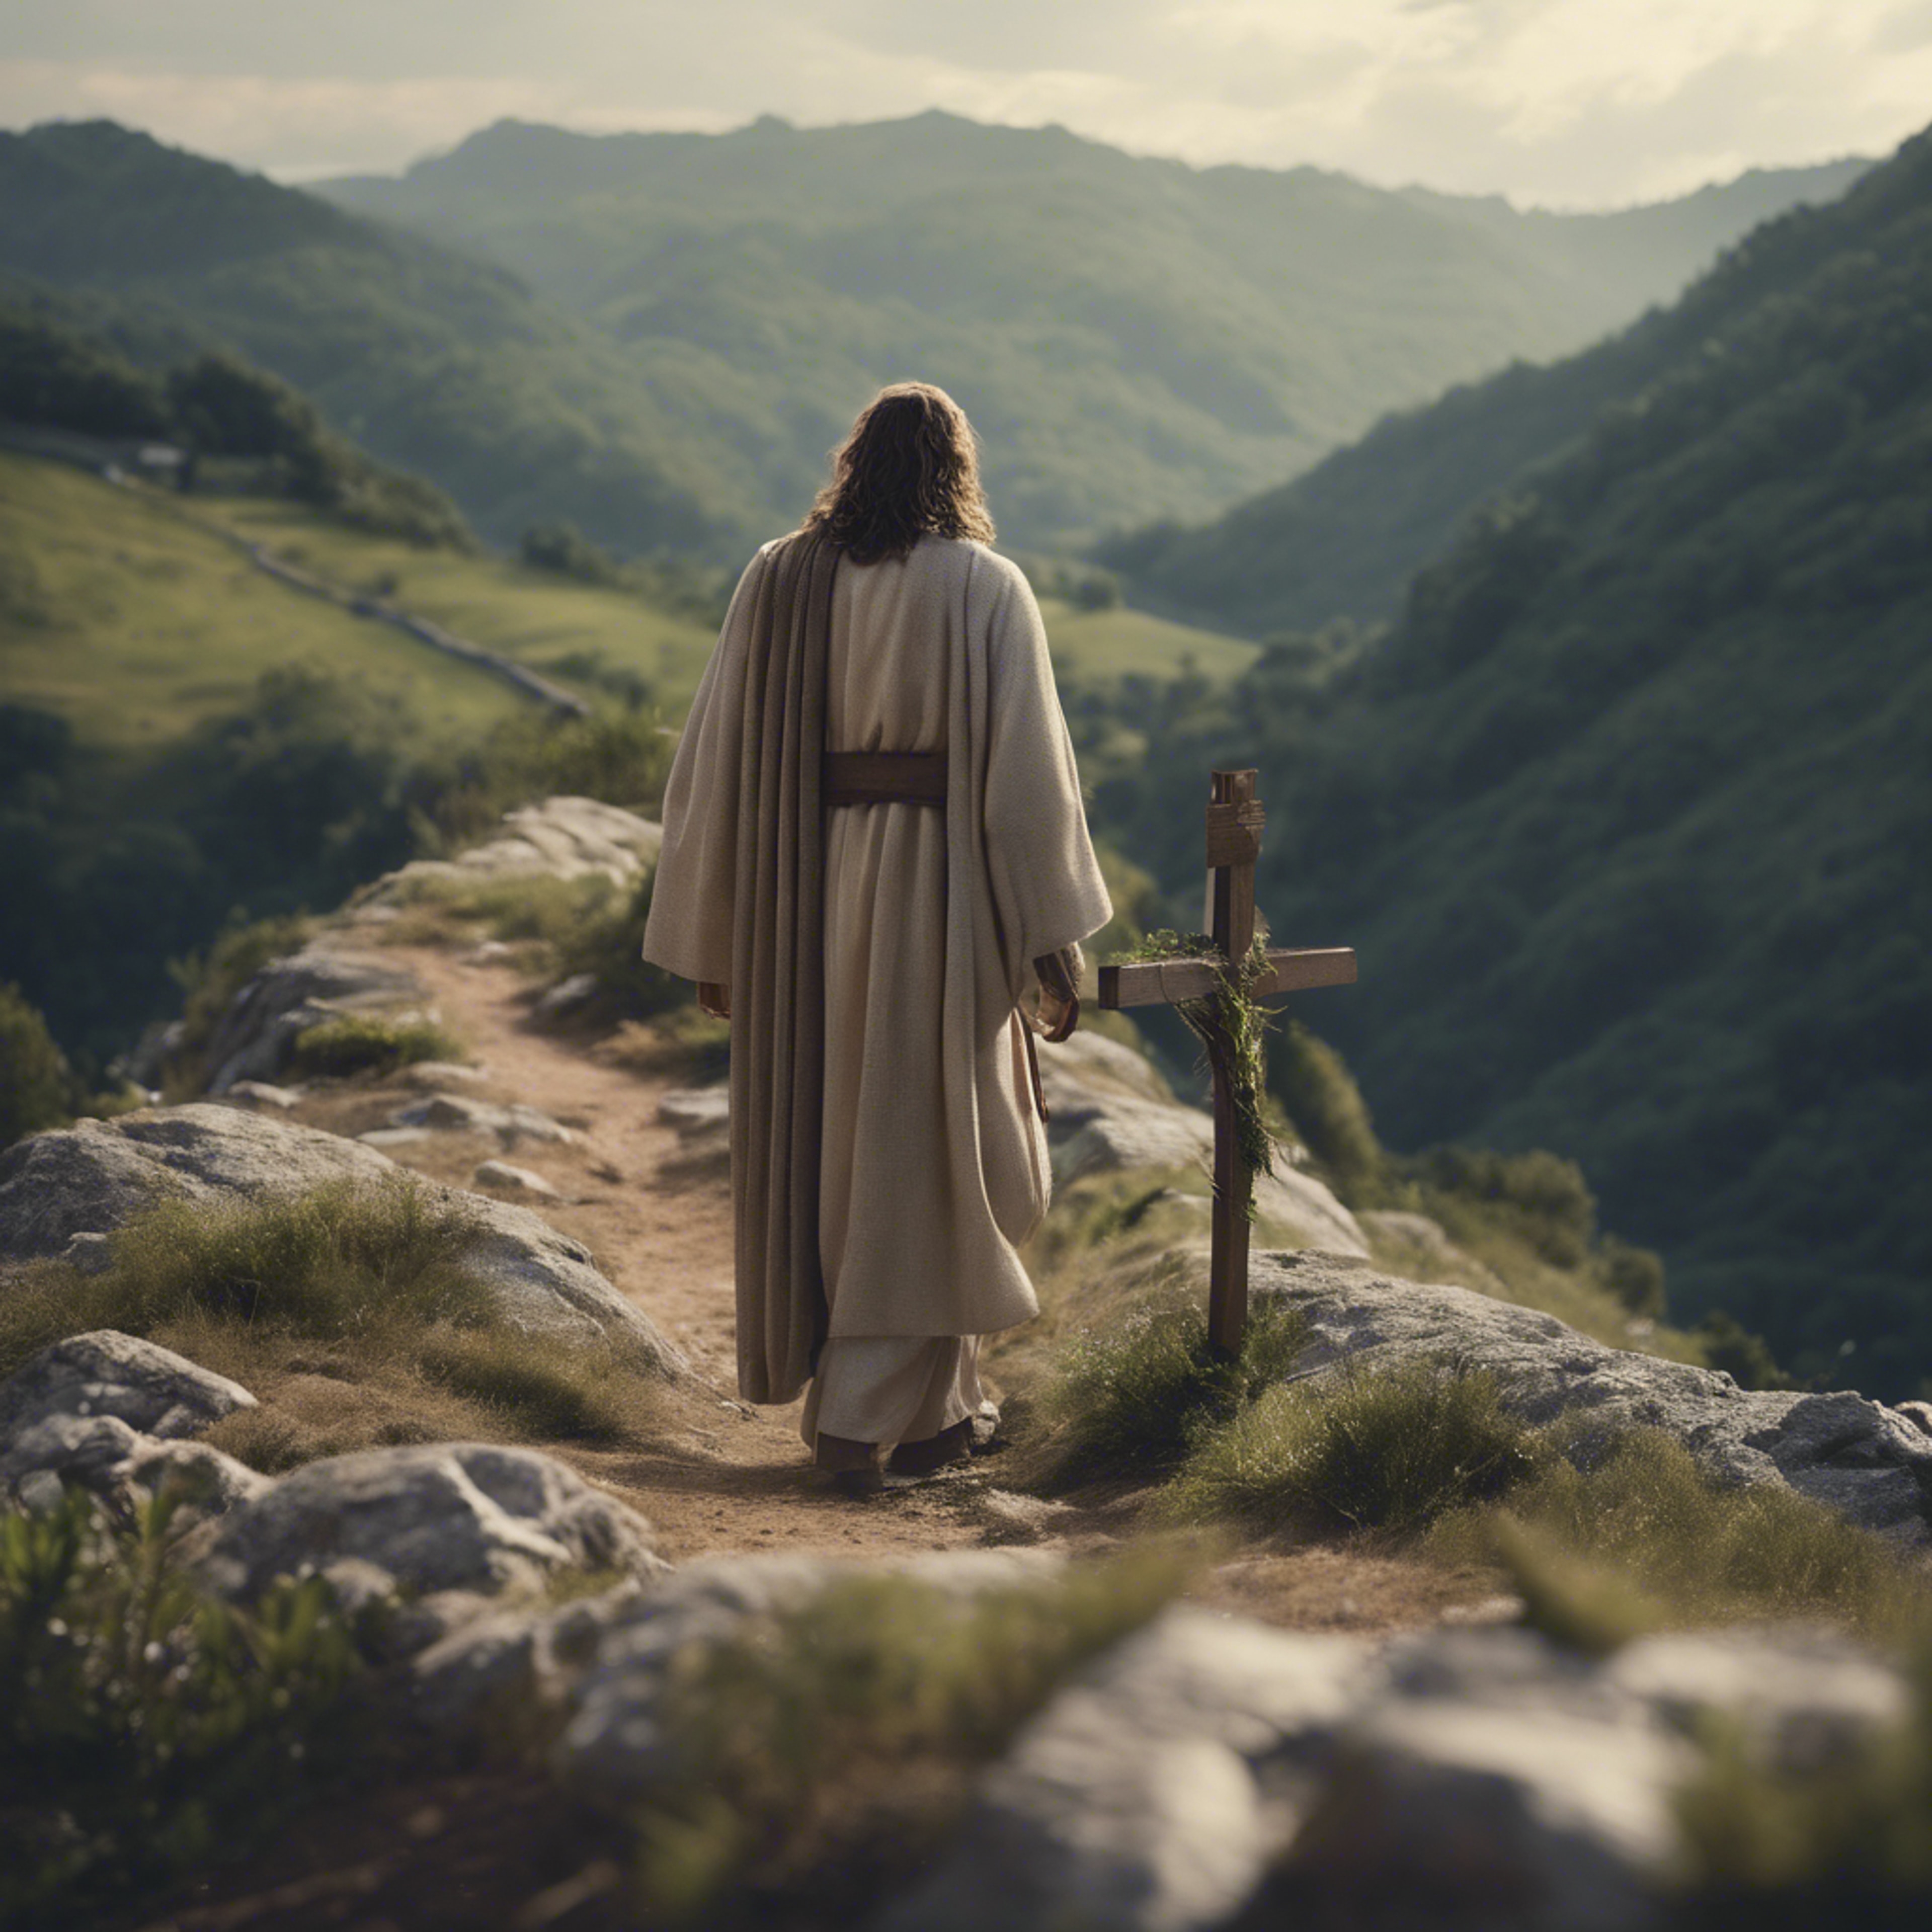 A somber yet inspiring scene of Jesus carrying the cross along a winding mountain path. Тапет[cec6dd957e1b48d0bb97]